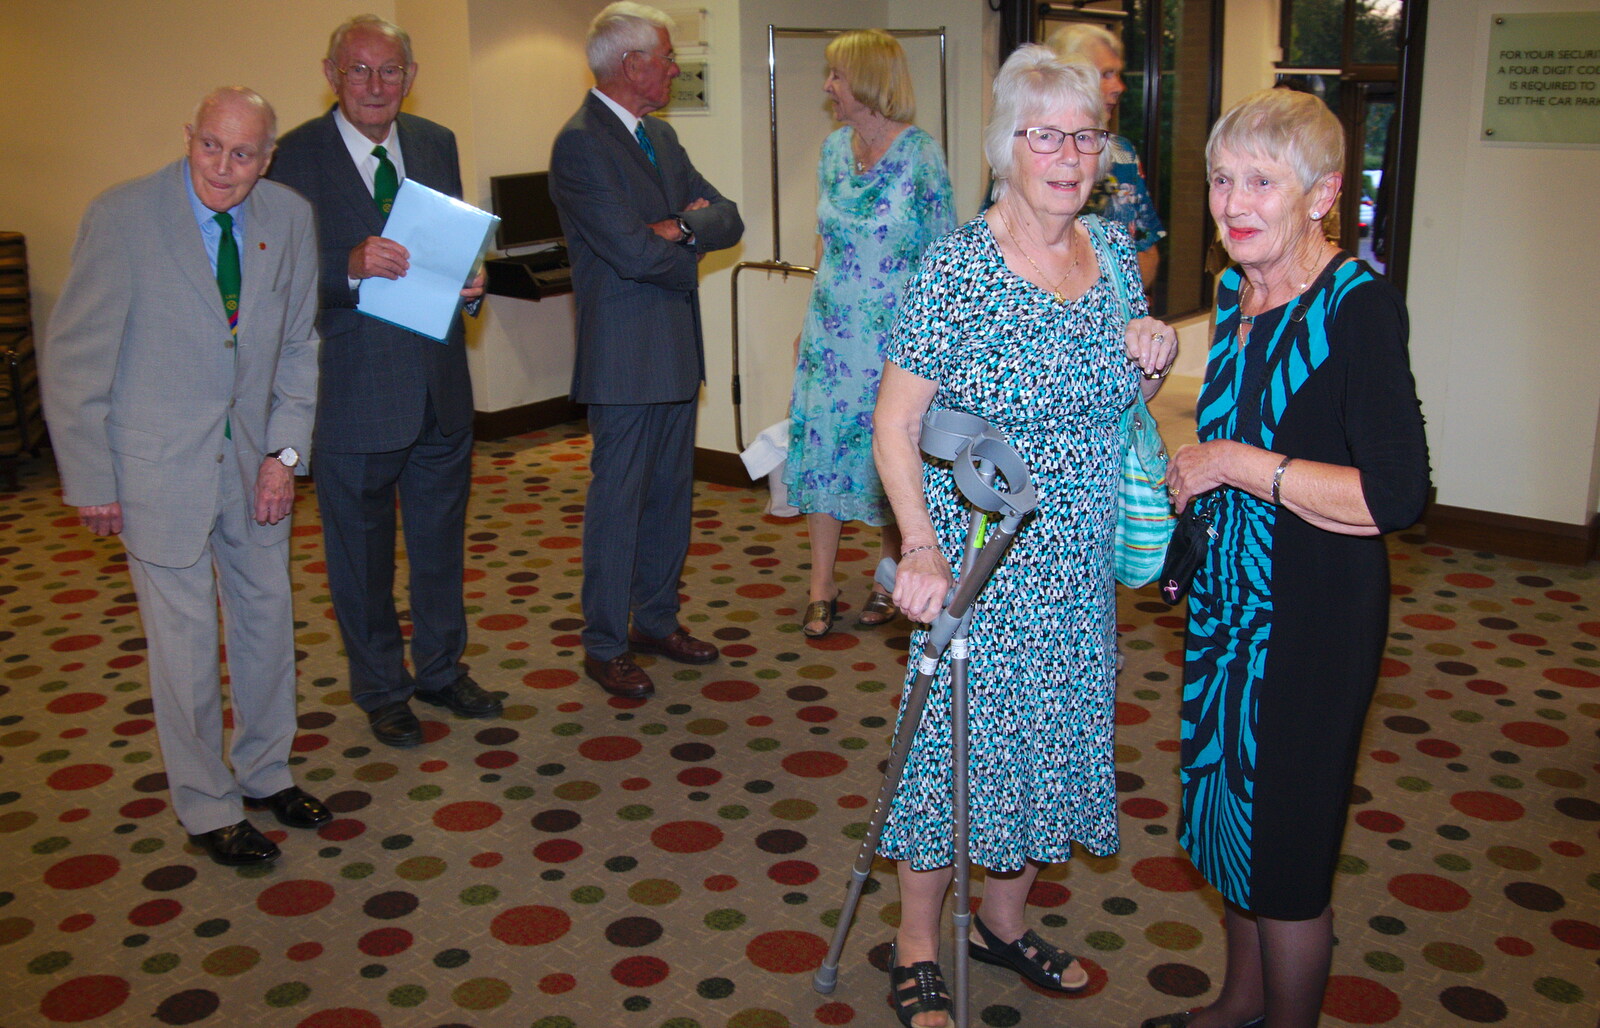 The guests re-assemble in the hotel foyer from Kenilworth Castle and the 69th Entry Reunion Dinner, Stratford, Warwickshire - 14th September 2019